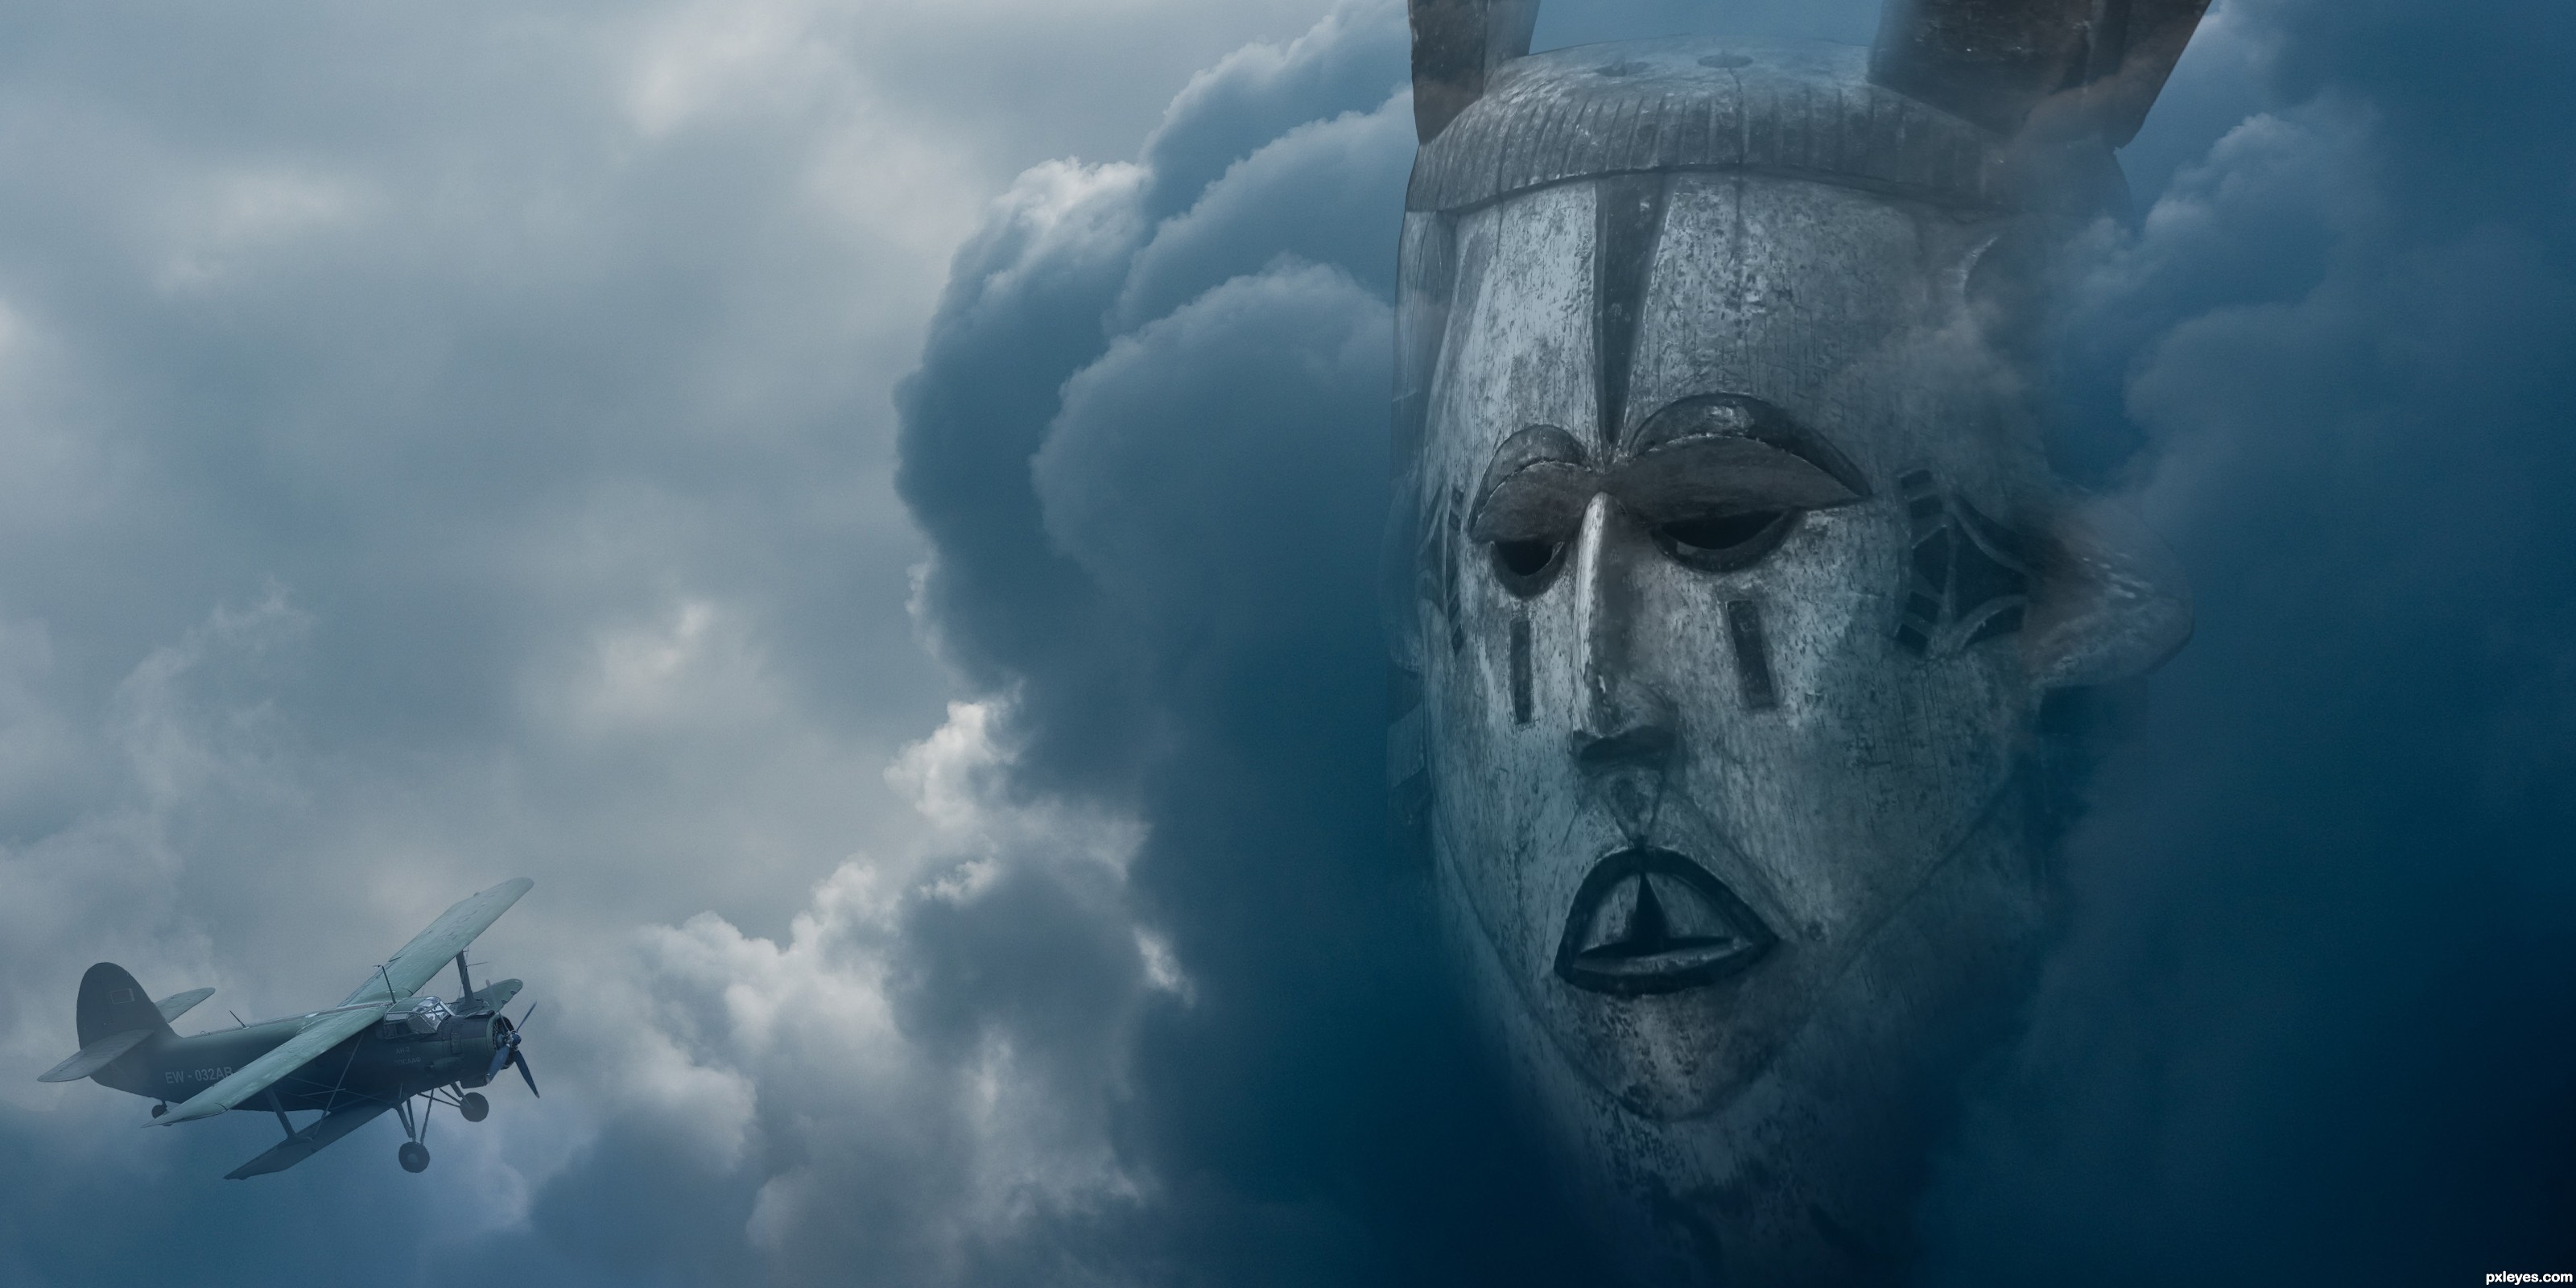 The God of the Sky picture, by for: the mask photoshop contest - 